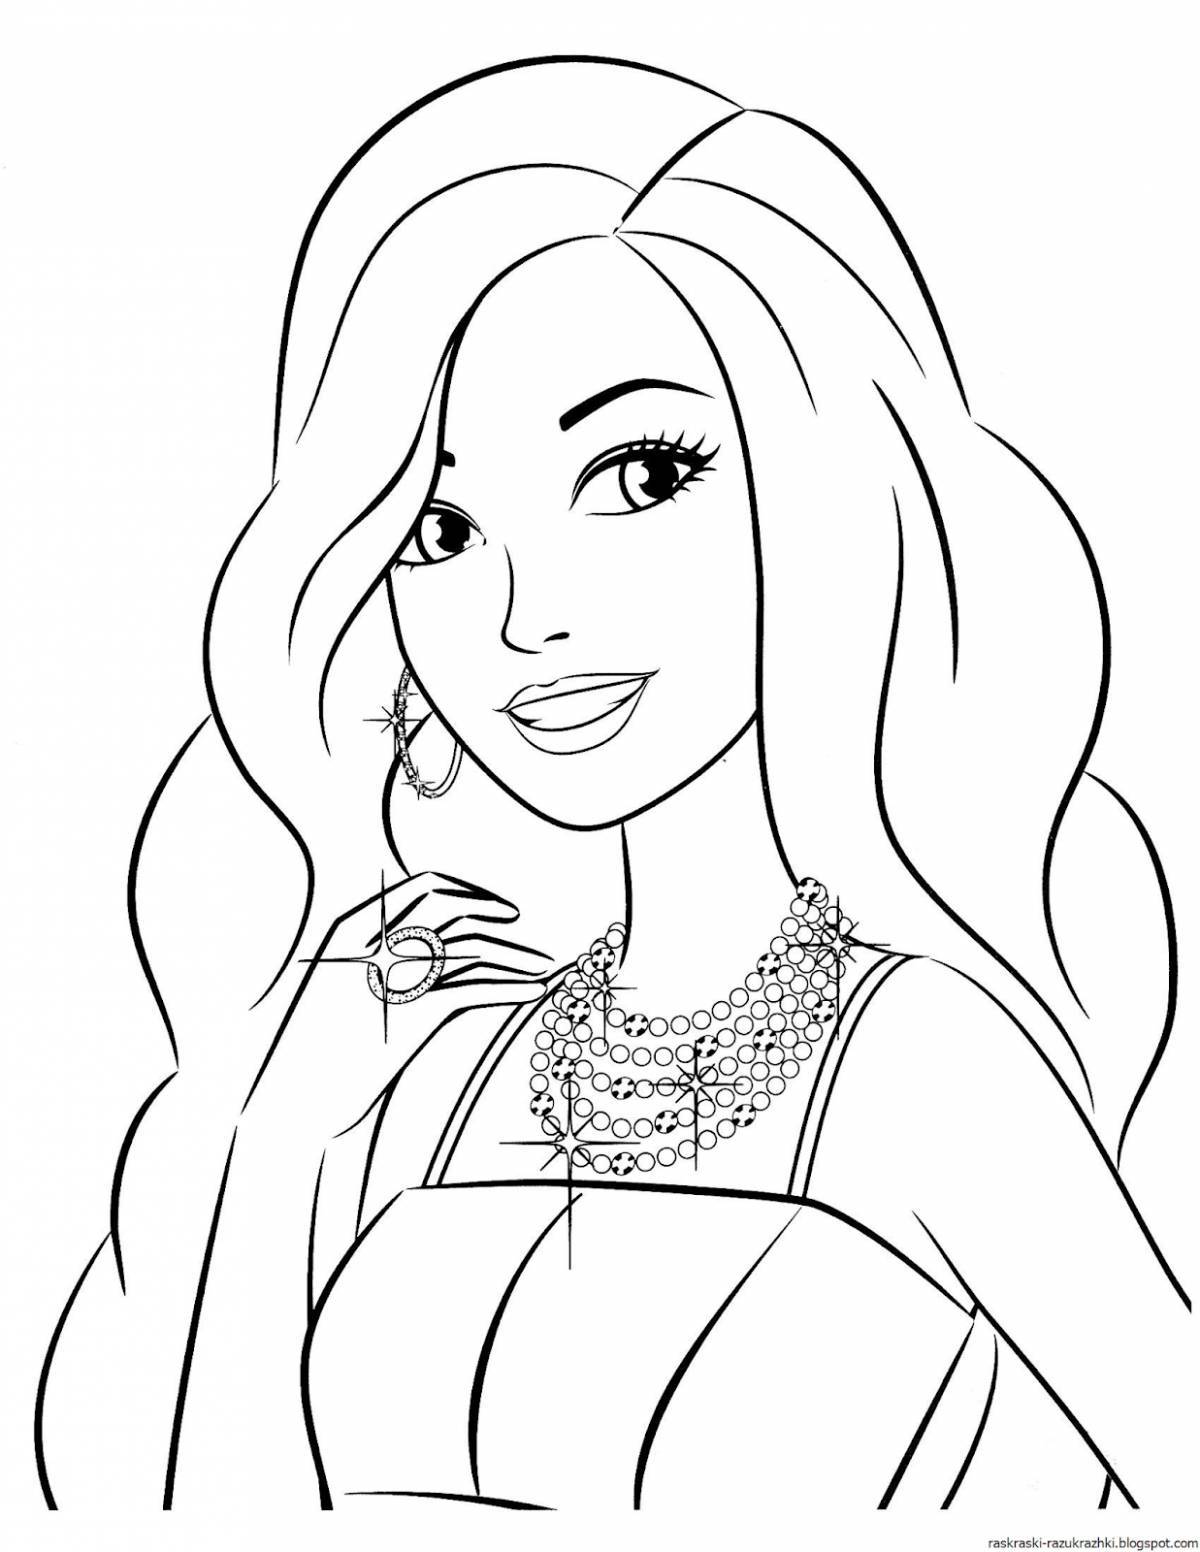 Live coloring for girls